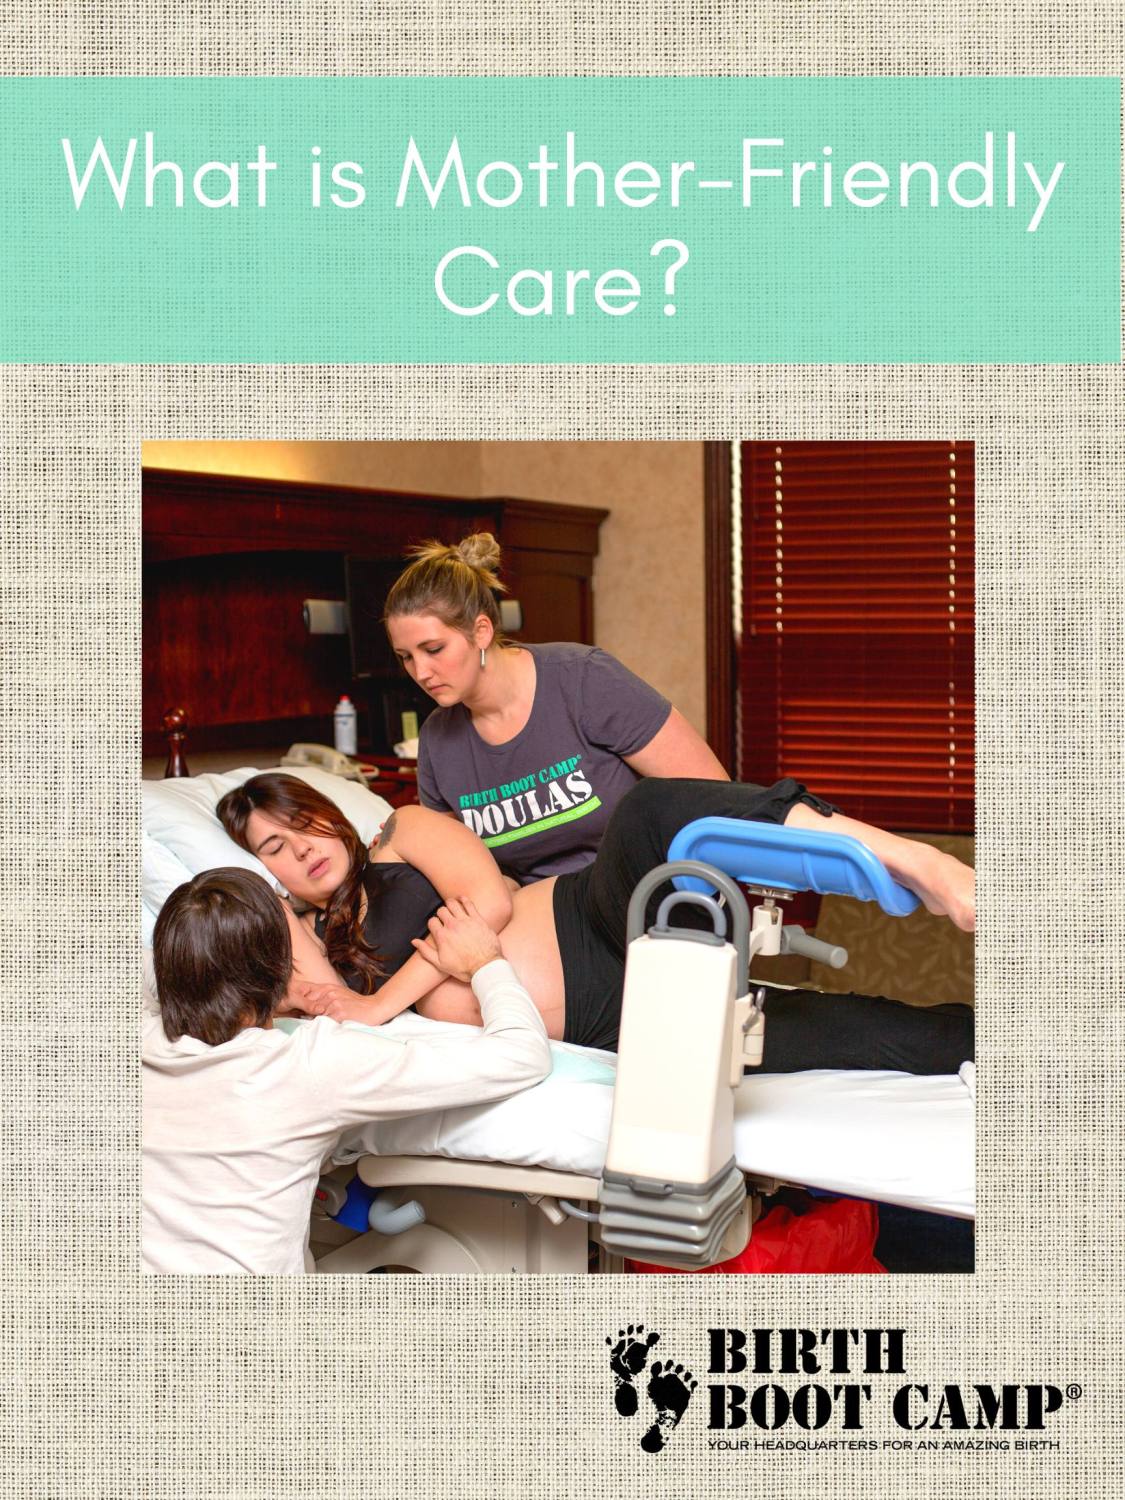 What is Mother-Friendly Care?